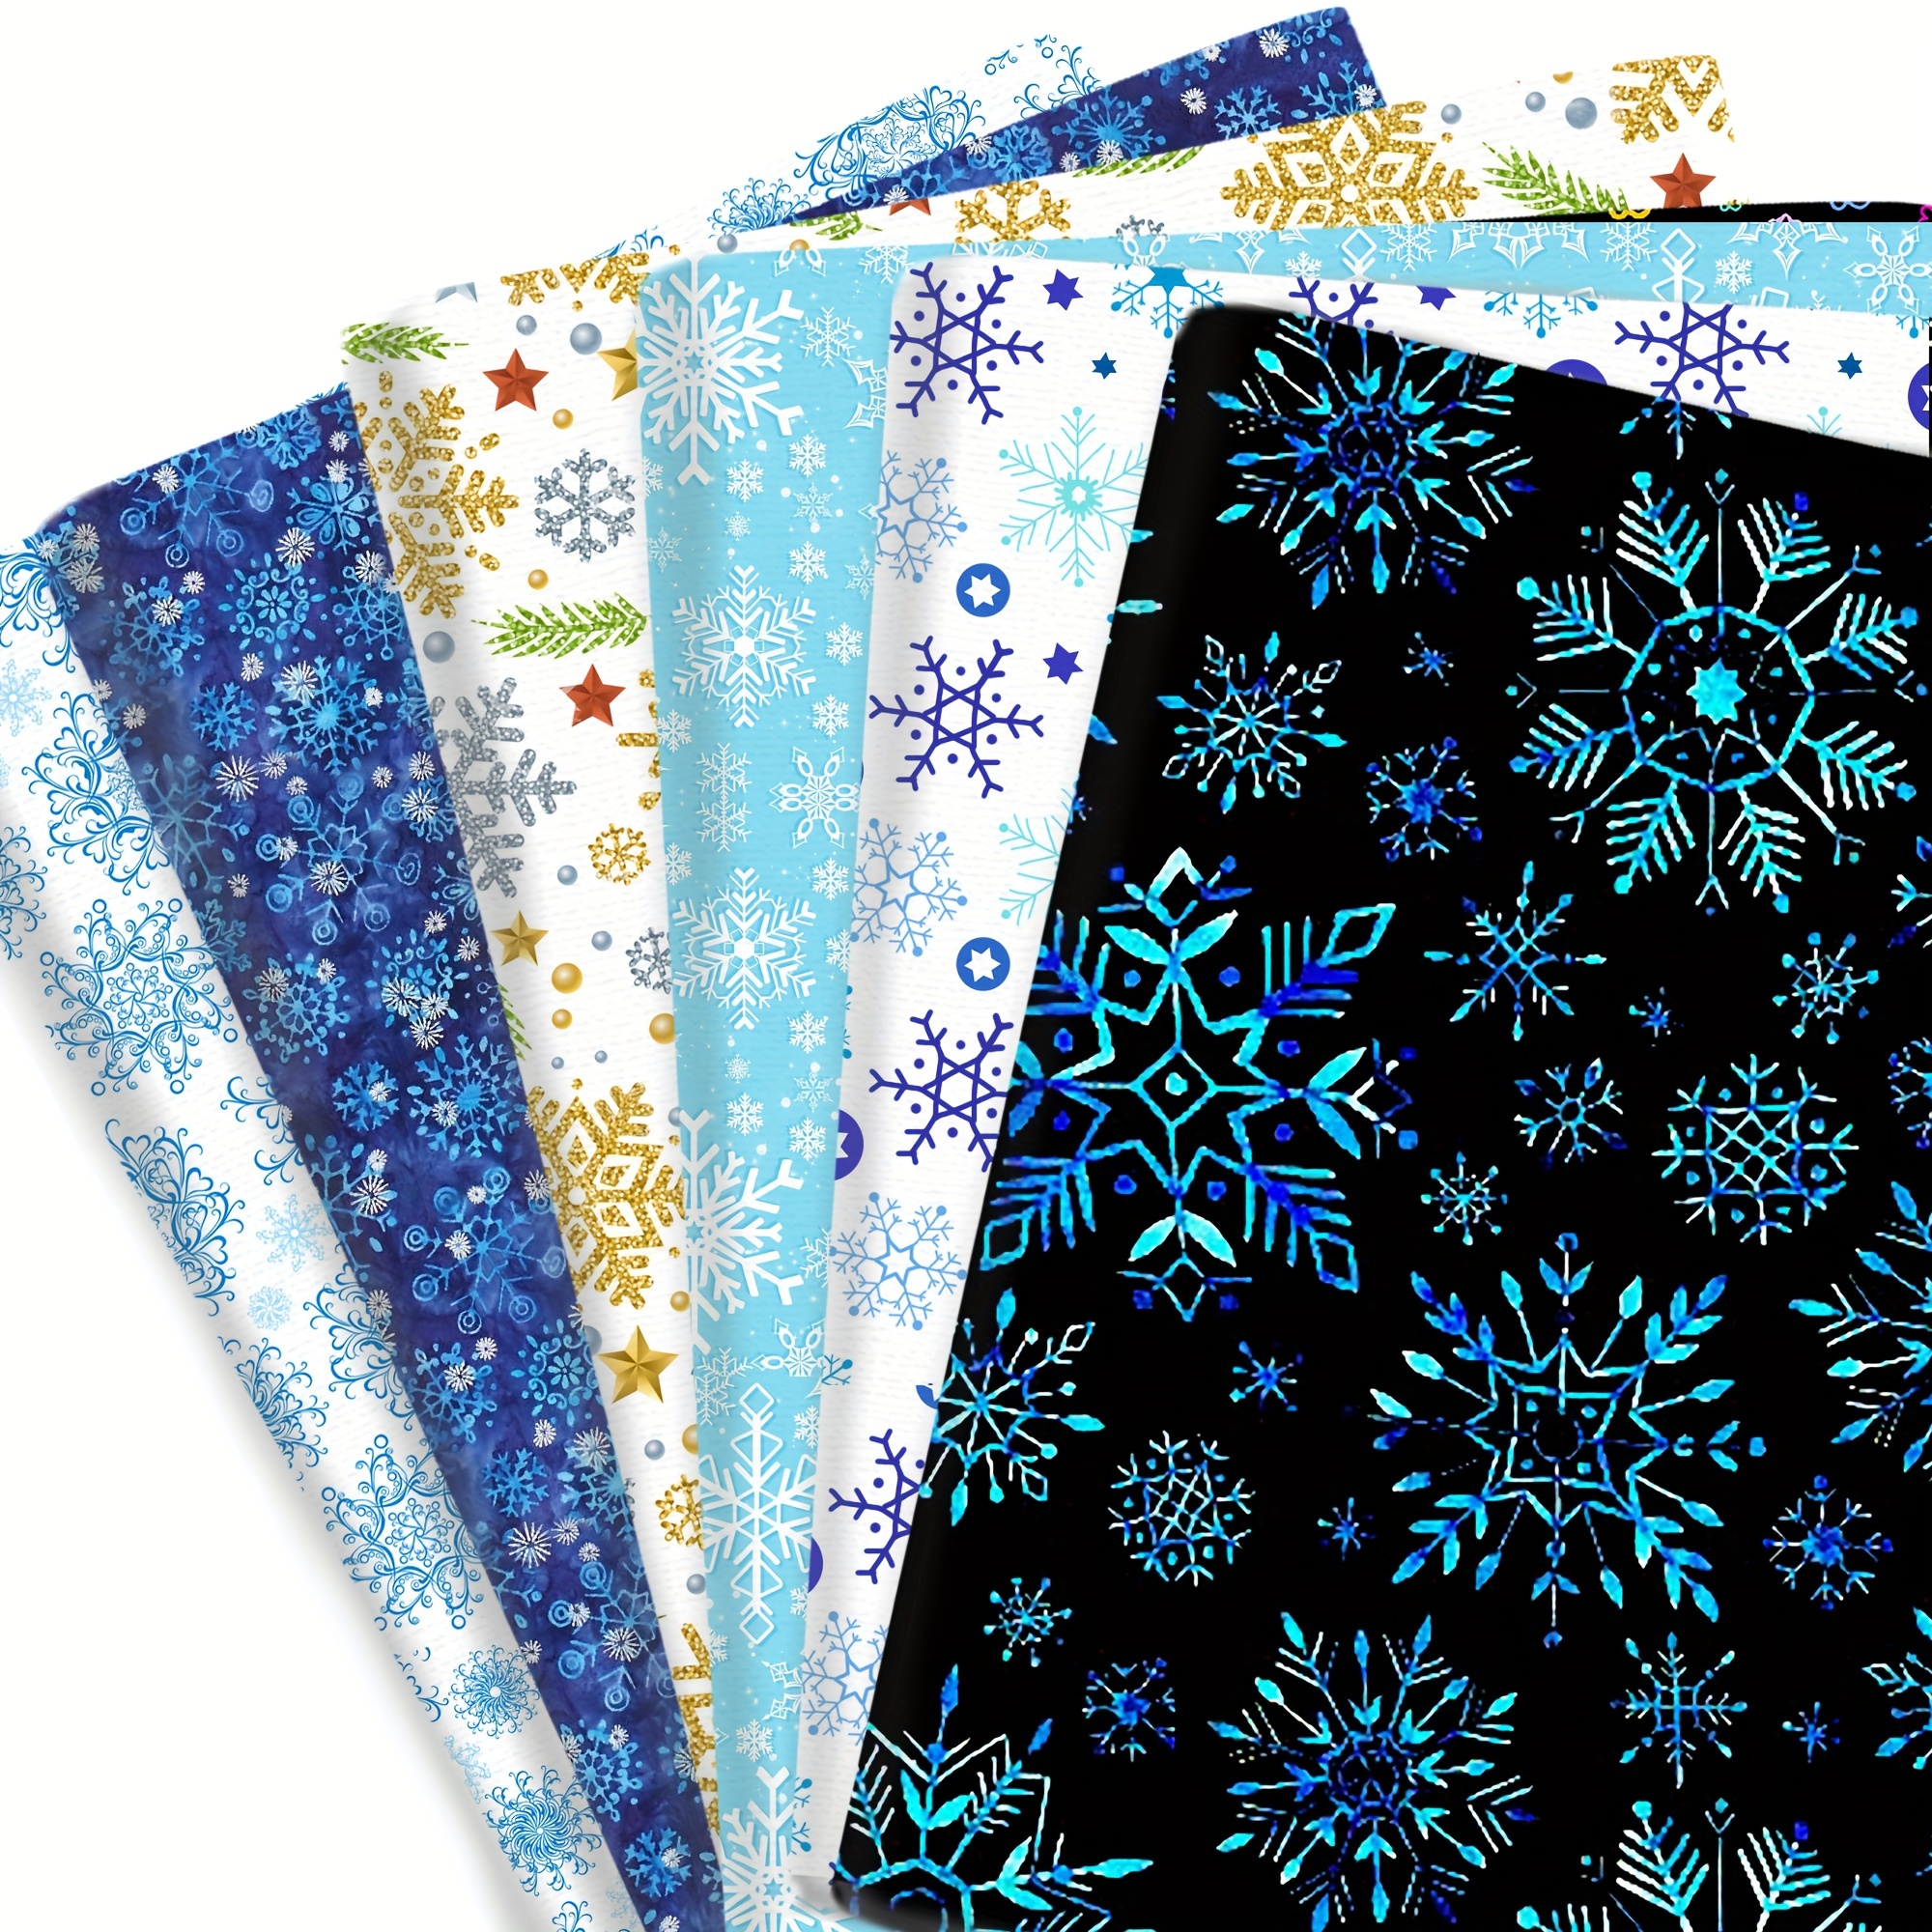 

Snow Flower Print Quilting Fabric - 57x19.68 Inch Precut Polyester Cotton Blend (95/5) For Diy Crafts, Patchwork, Handmade Doll Clothes, Tablecloths, Aprons, Bags, Pillows - Hand Wash Only (108gsm)